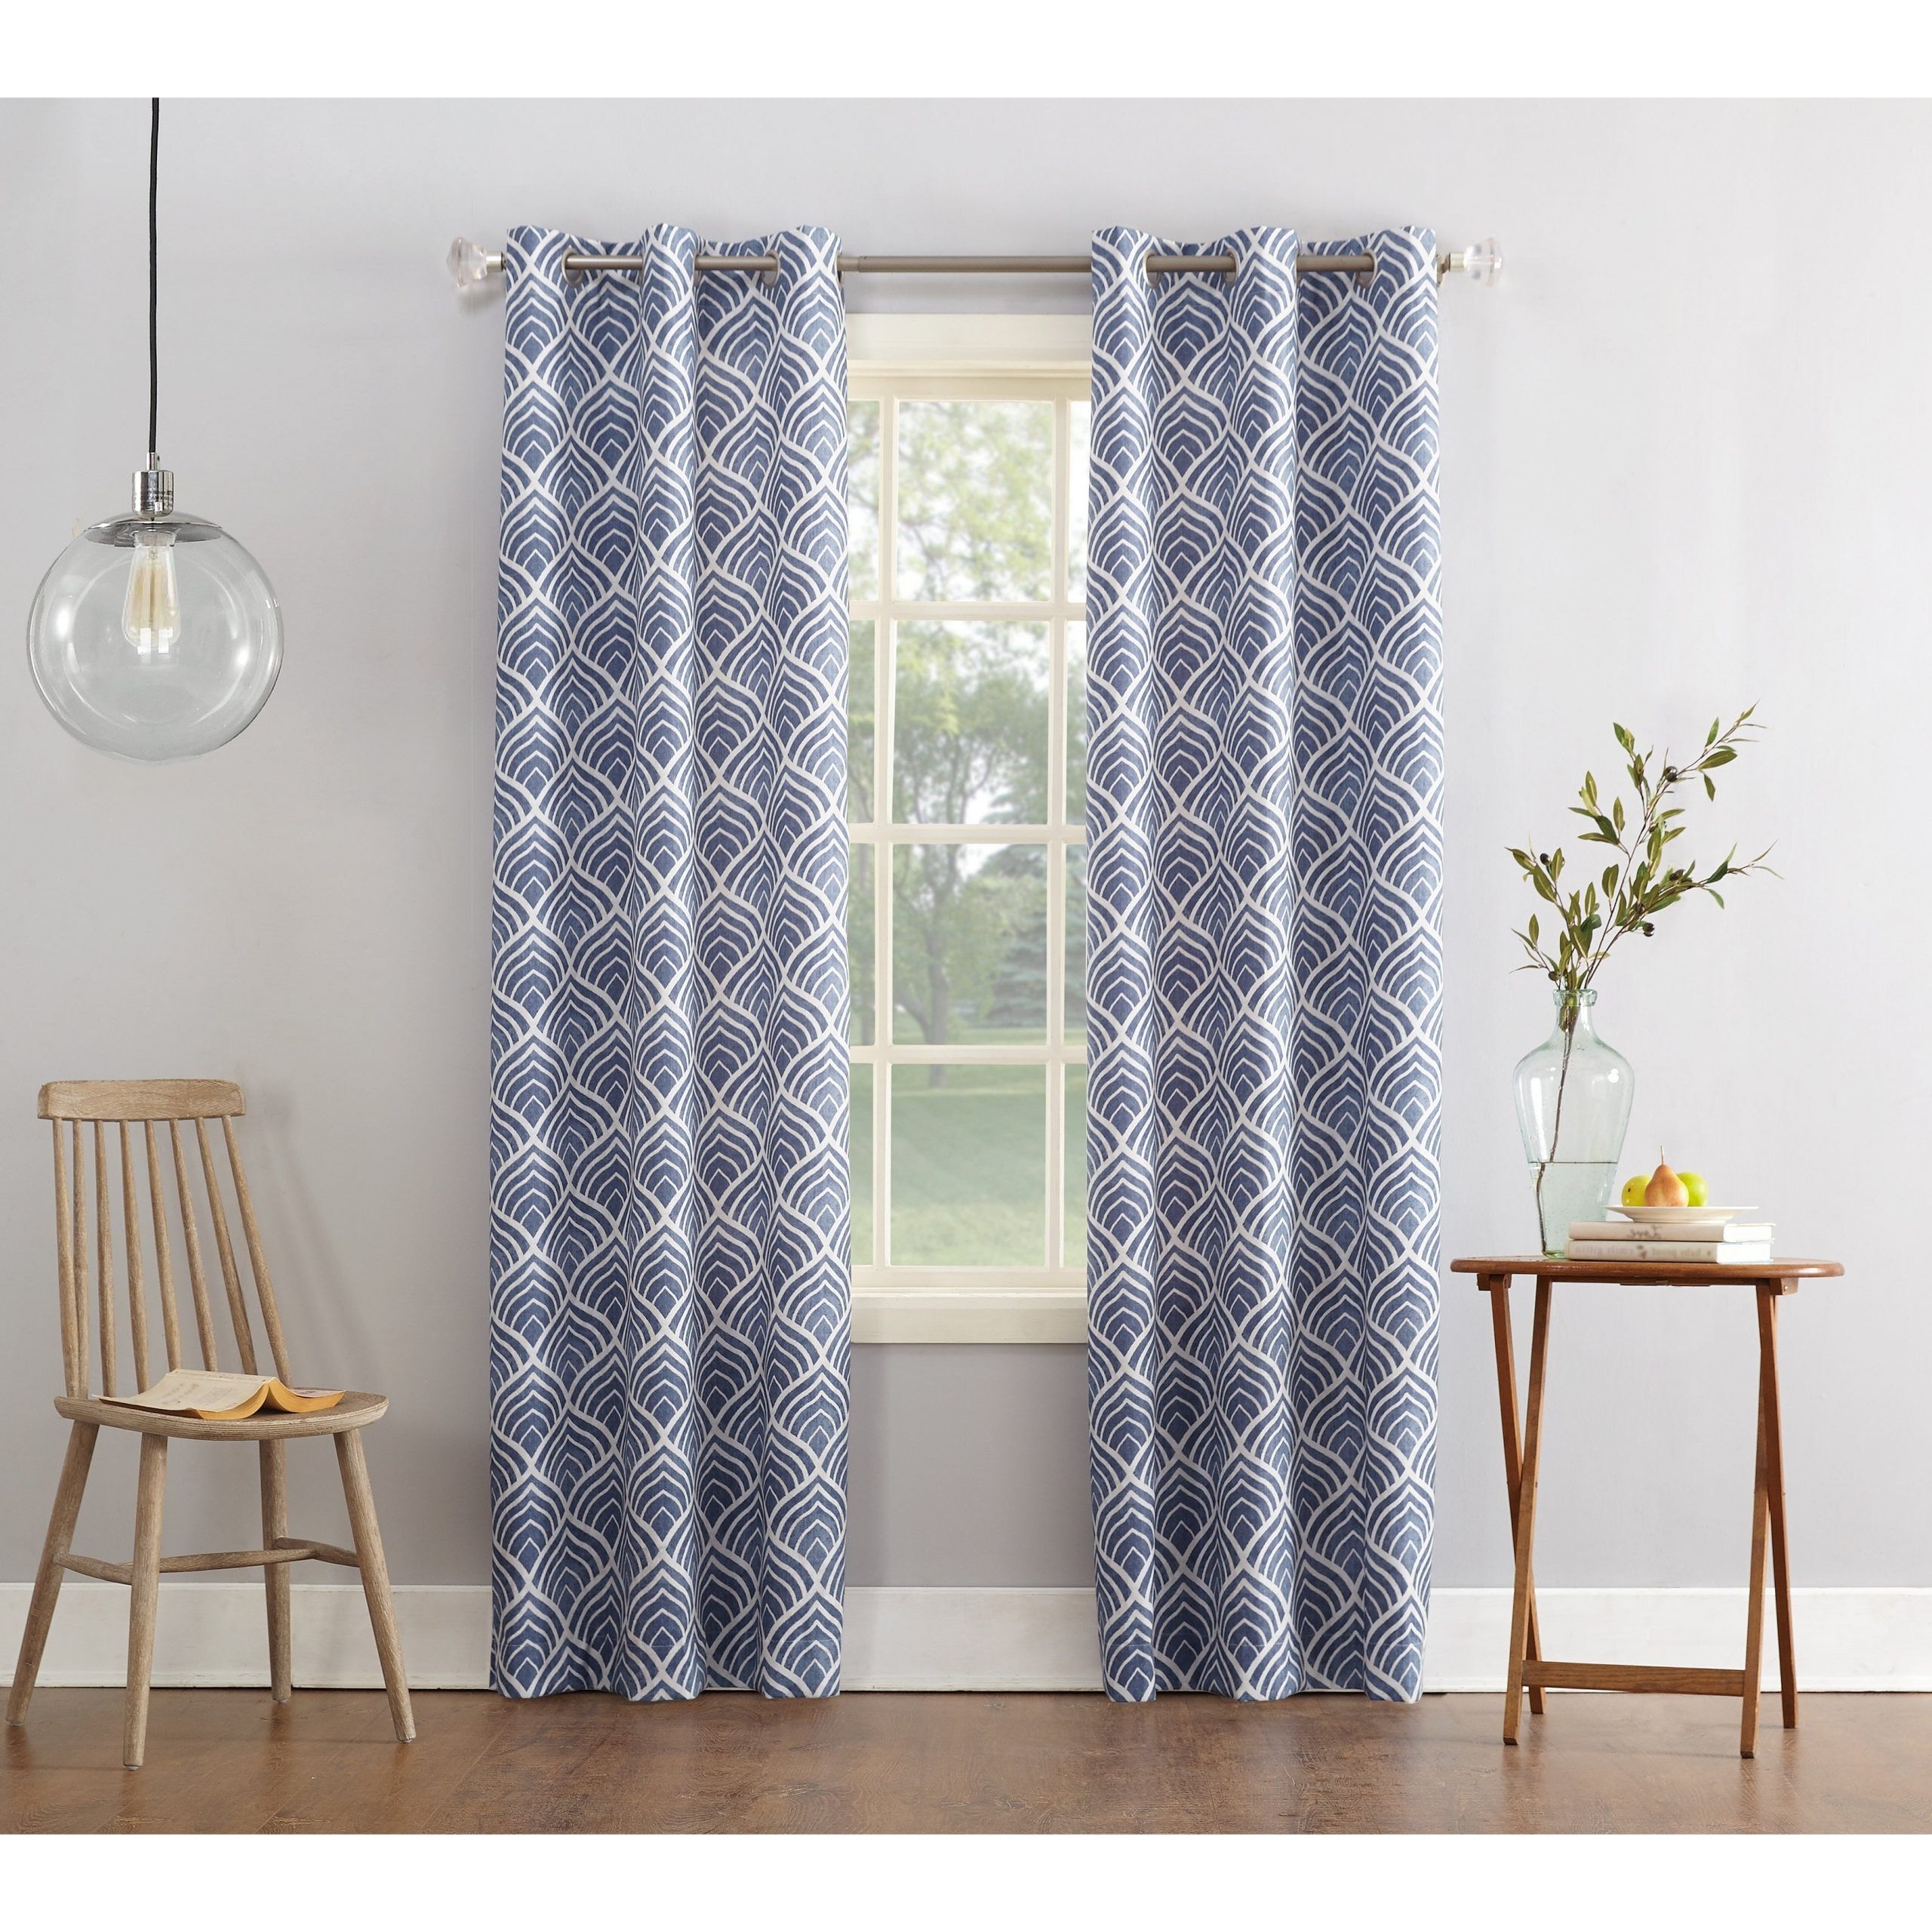 Sun Zero Clarke Geometric Print Textured Thermal Insulated Grommet Curtain  Panel In Most Up To Date Geometric Print Textured Thermal Insulated Grommet Curtain Panels (View 1 of 20)